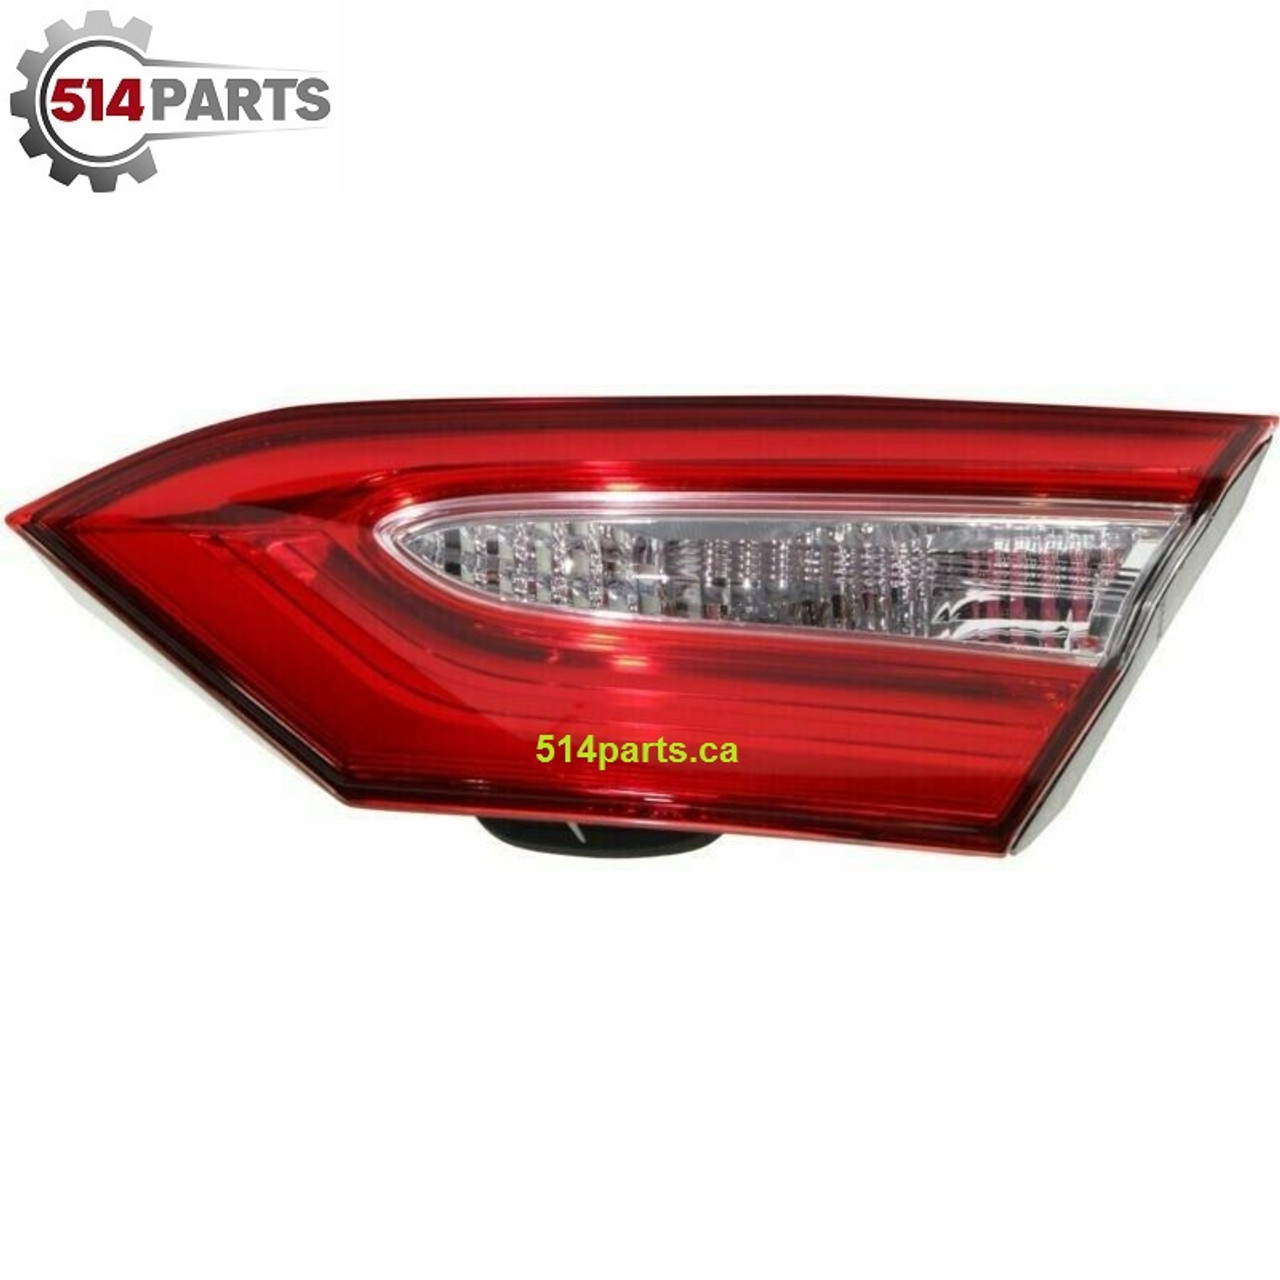 2018 - 2020 TOYOTA CAMRY and CAMRY HYBRID SE USA BUILT Models TRUNK LIGHTS High Quality - PHARES ARRIERE DE COFFRE  Haute Qualite